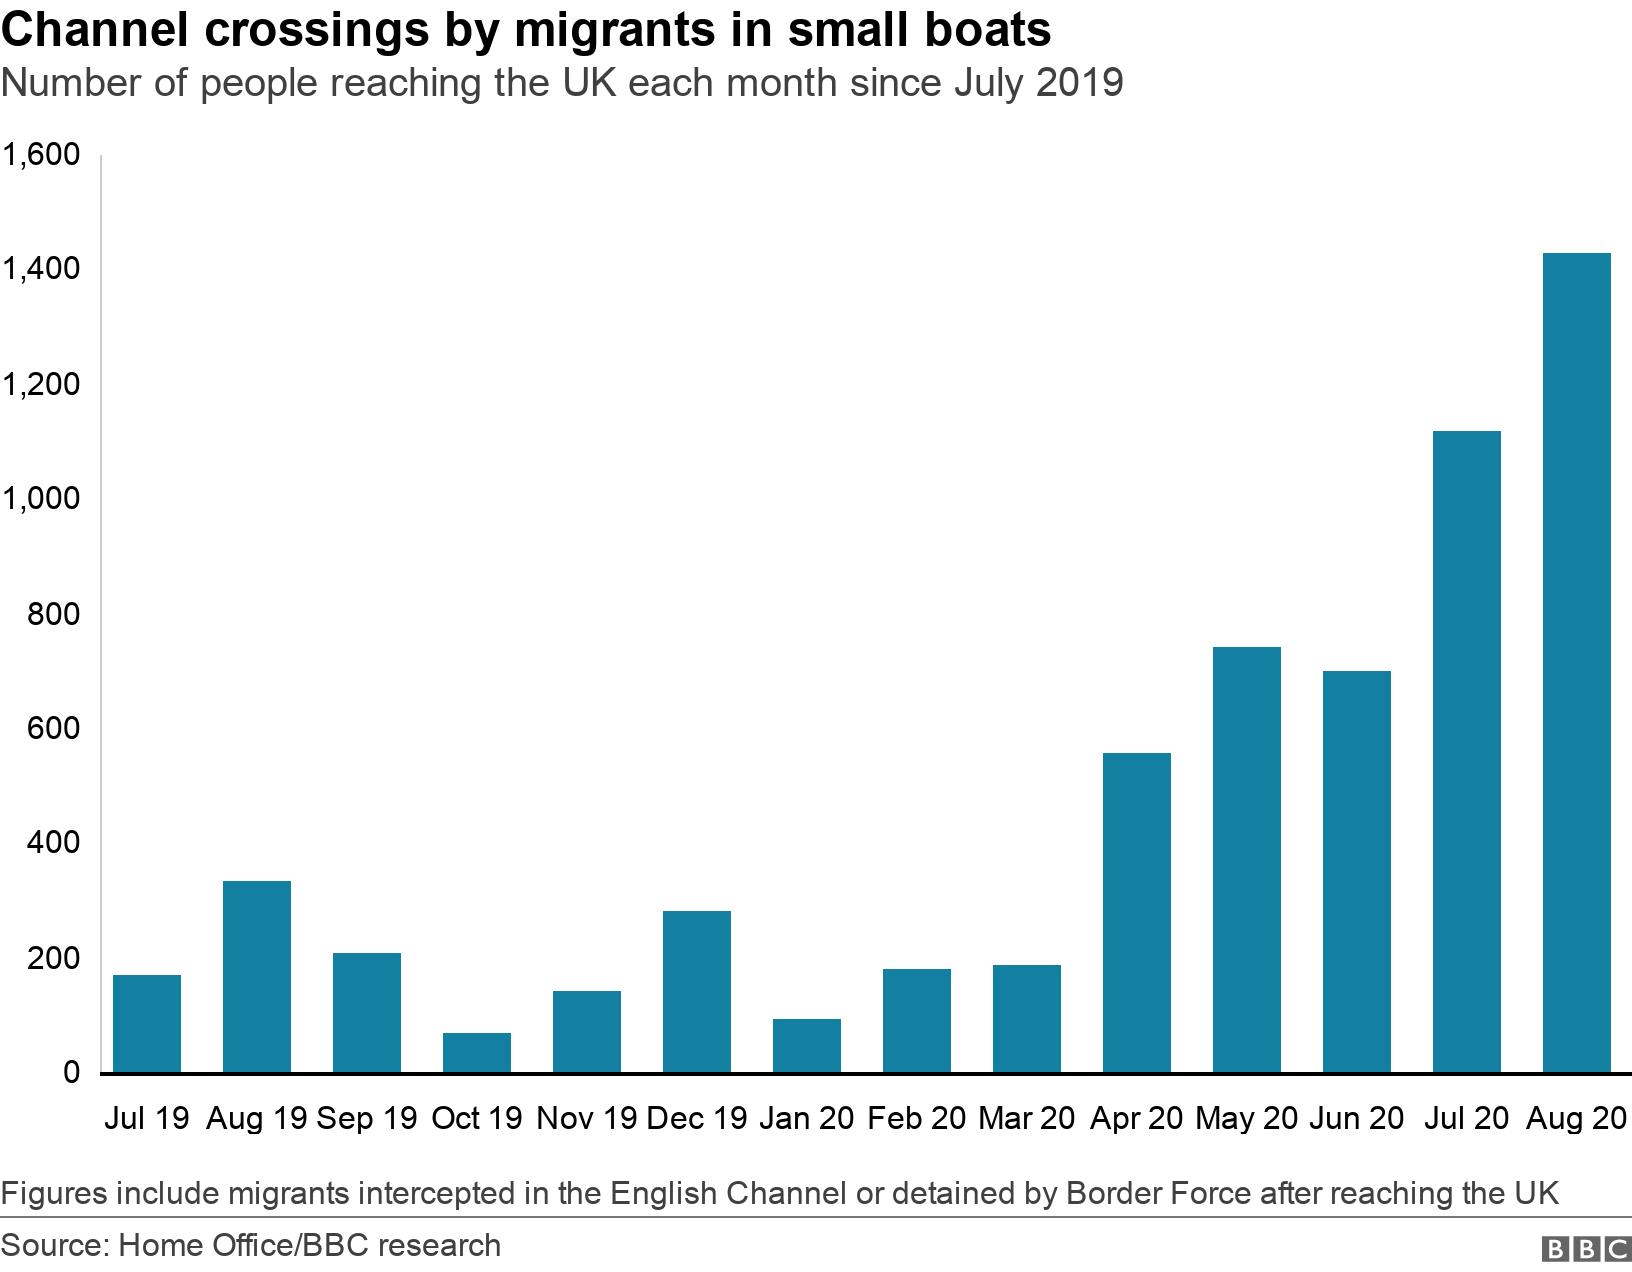 Channel crossings by migrants in small boats. Number of people reaching the UK each month since July 2019. Figures include migrants intercepted in the English Channel or detained by Border Force after reaching the UK.